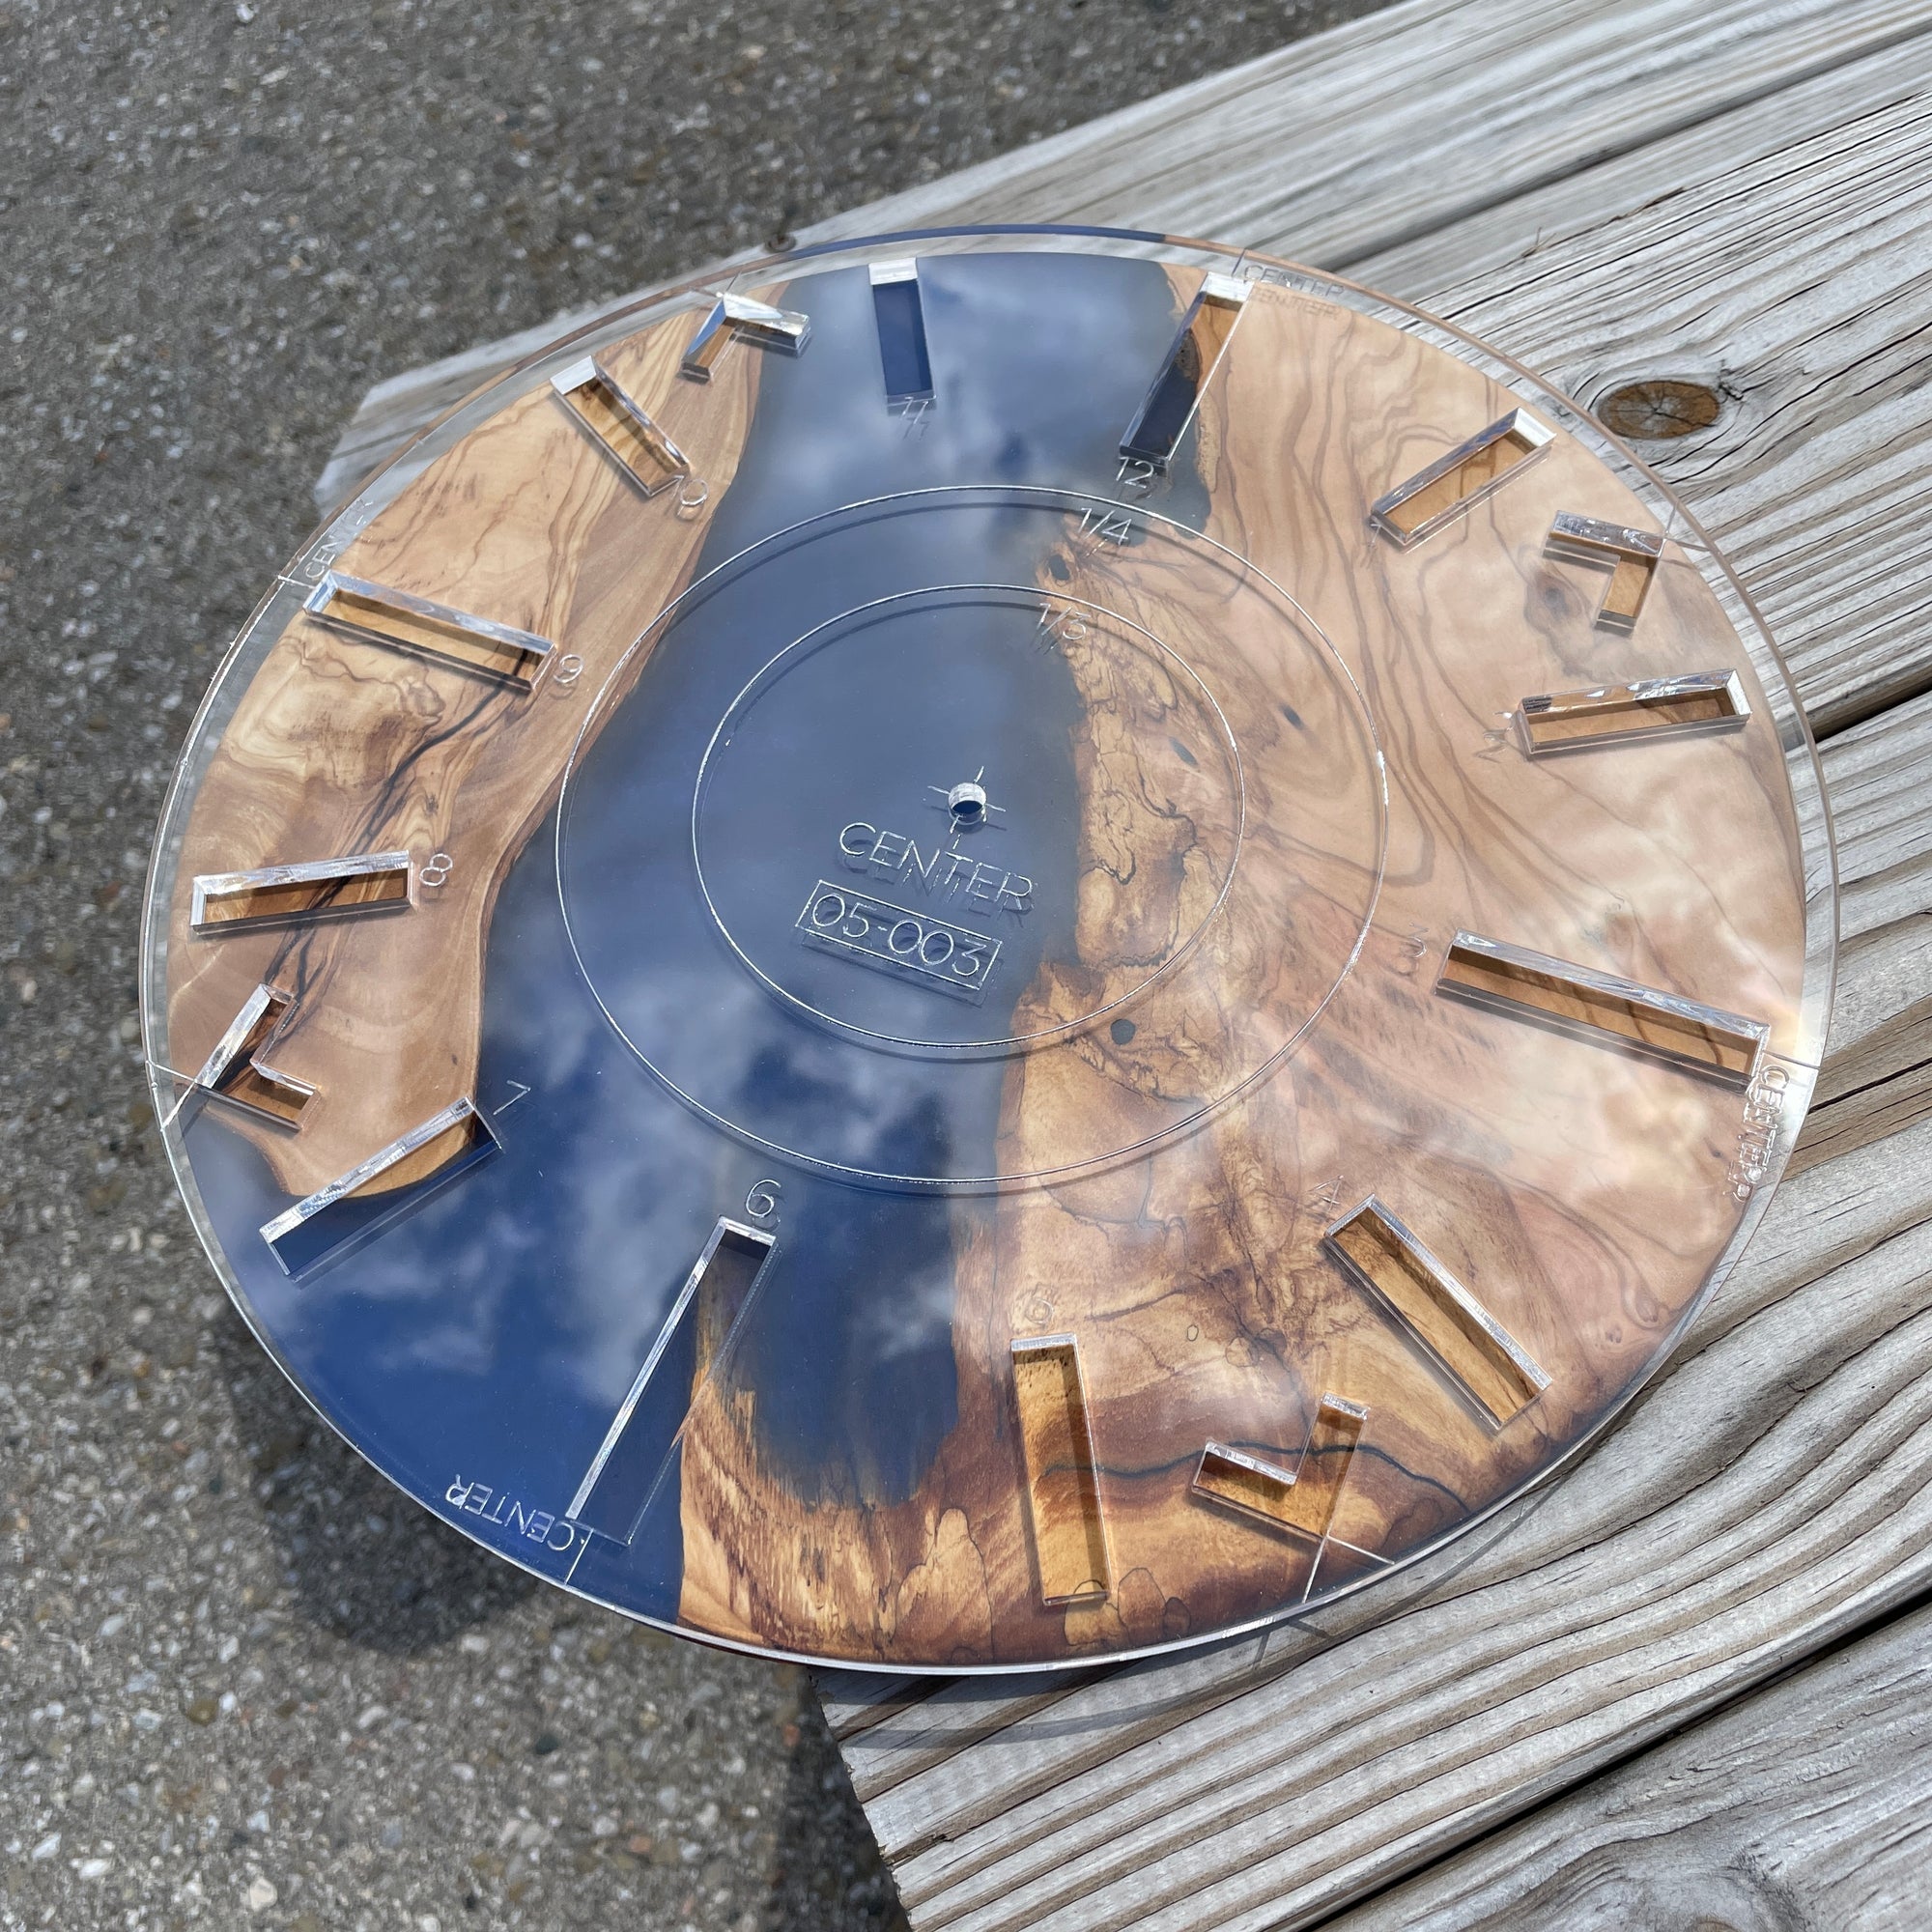 12" Round Layout Router Template